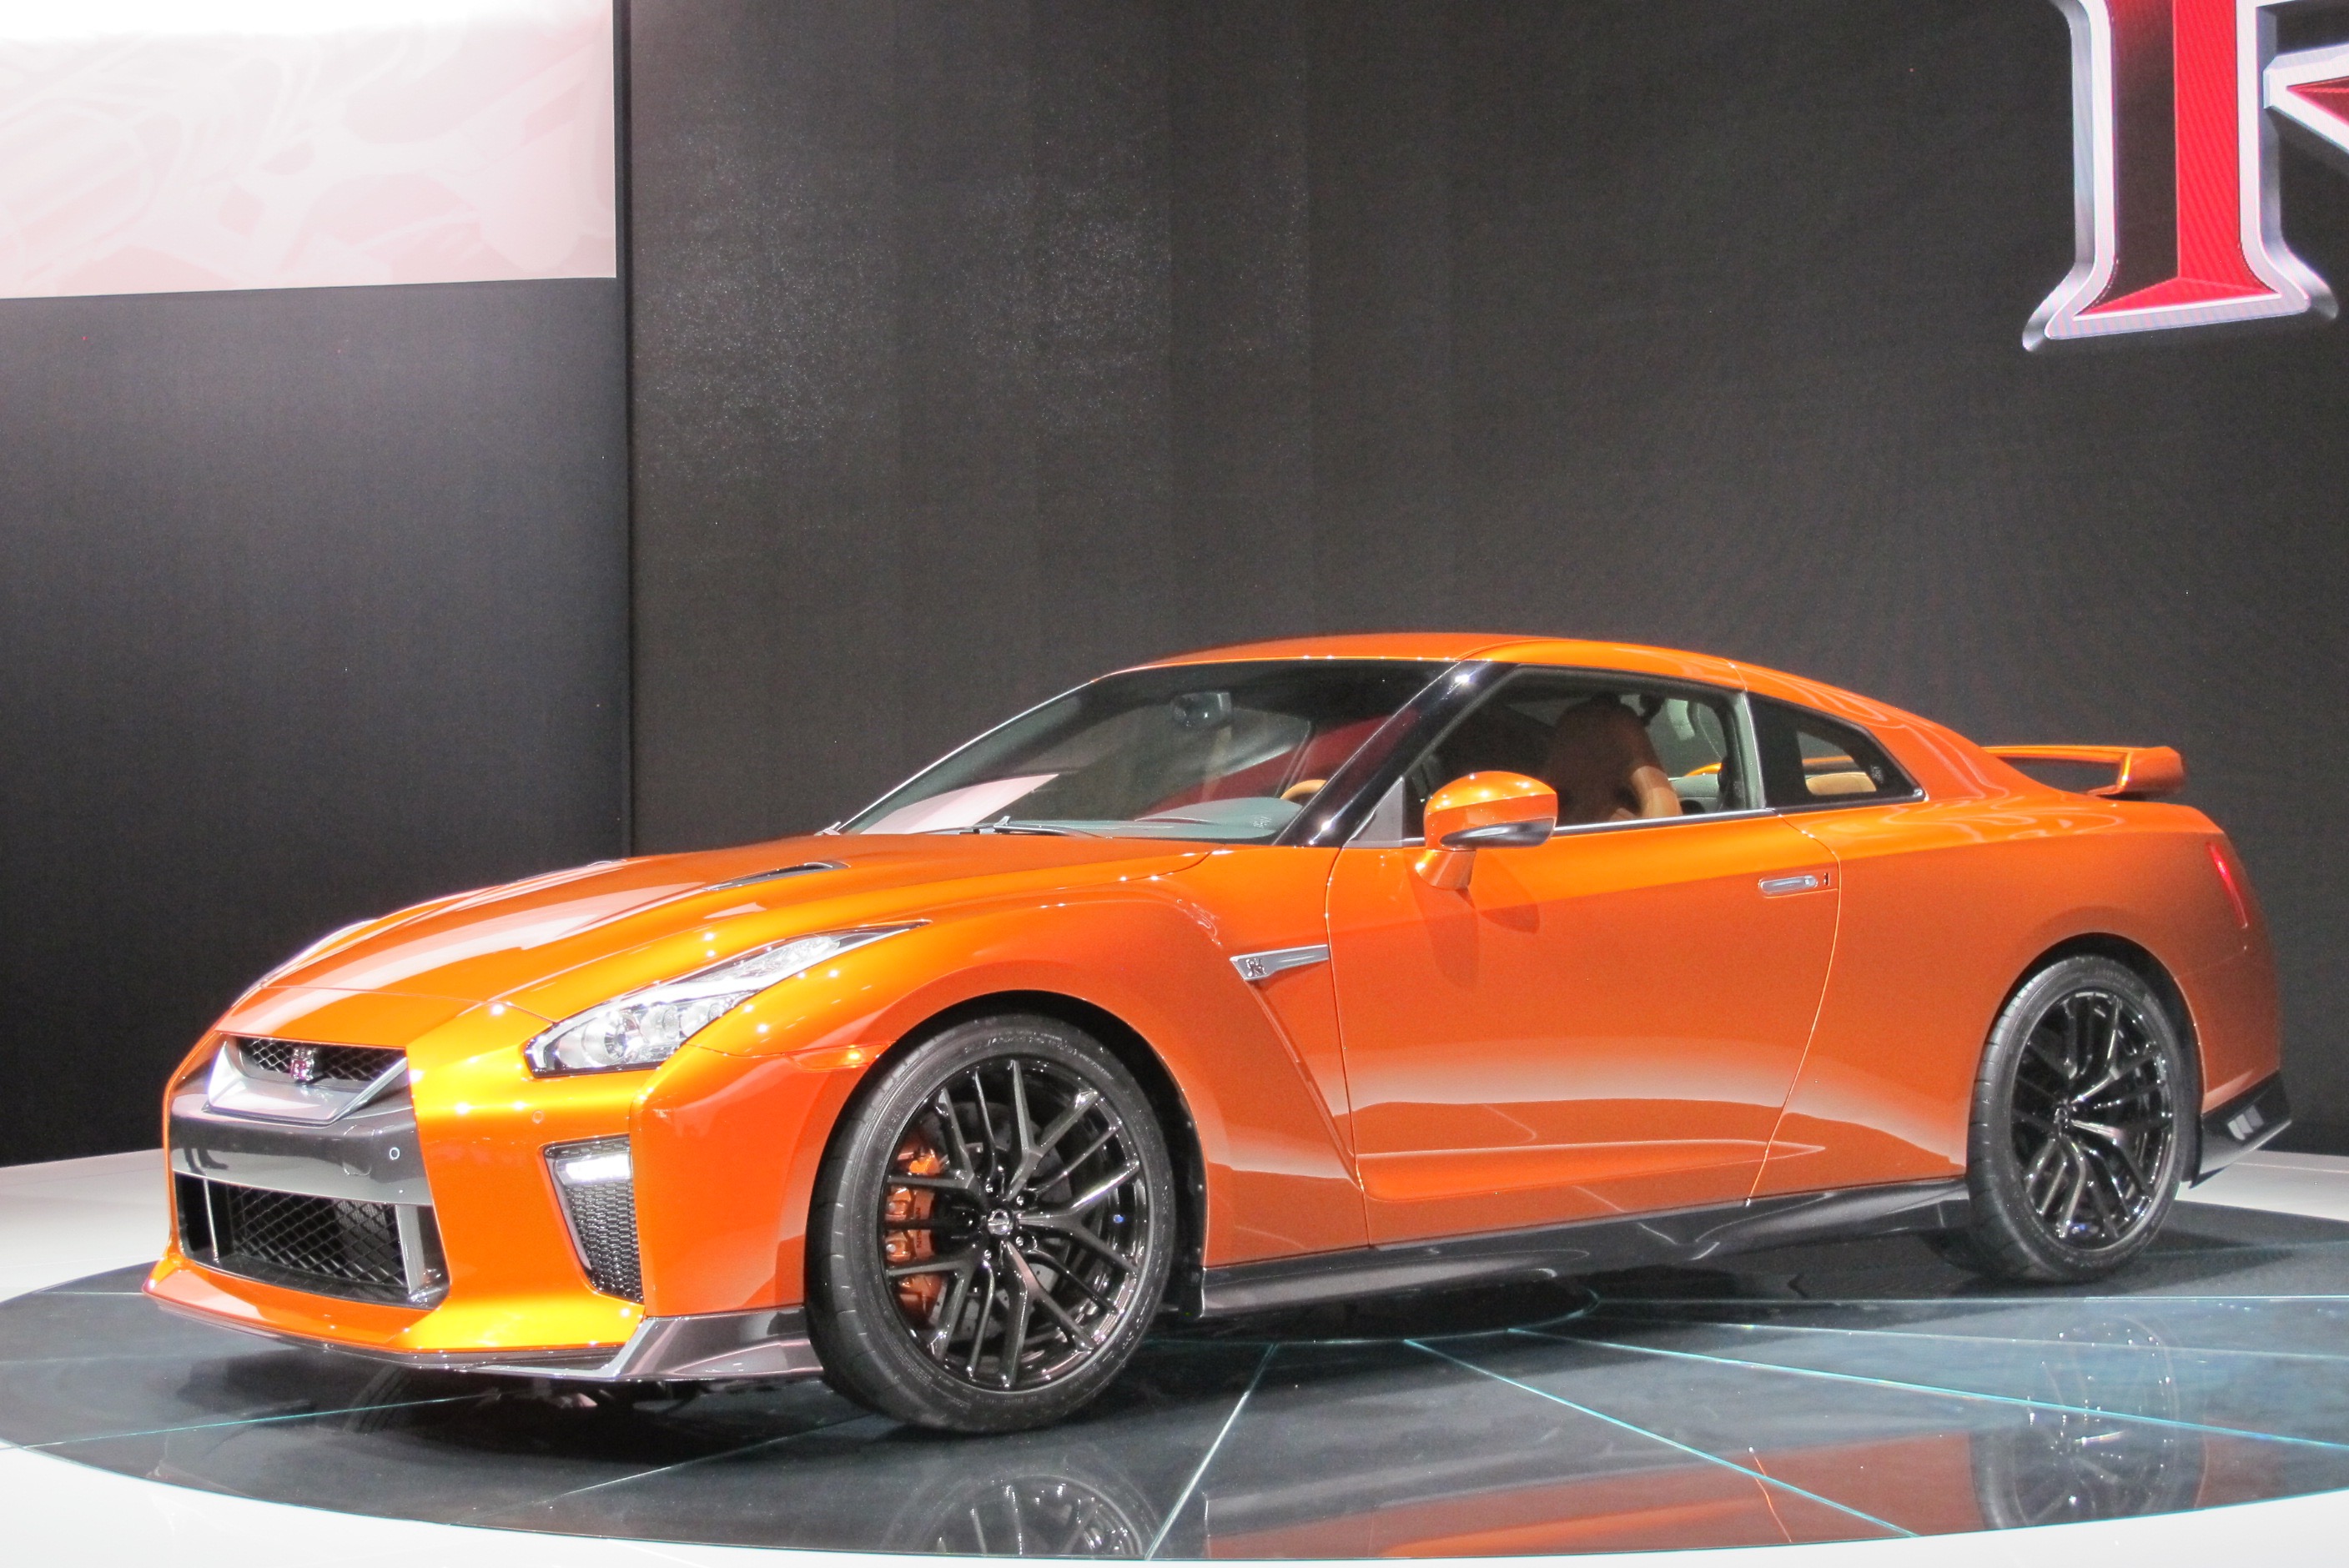 17 Nissan Gt R Gets New Look 565 Horsepower Live Photos And Video